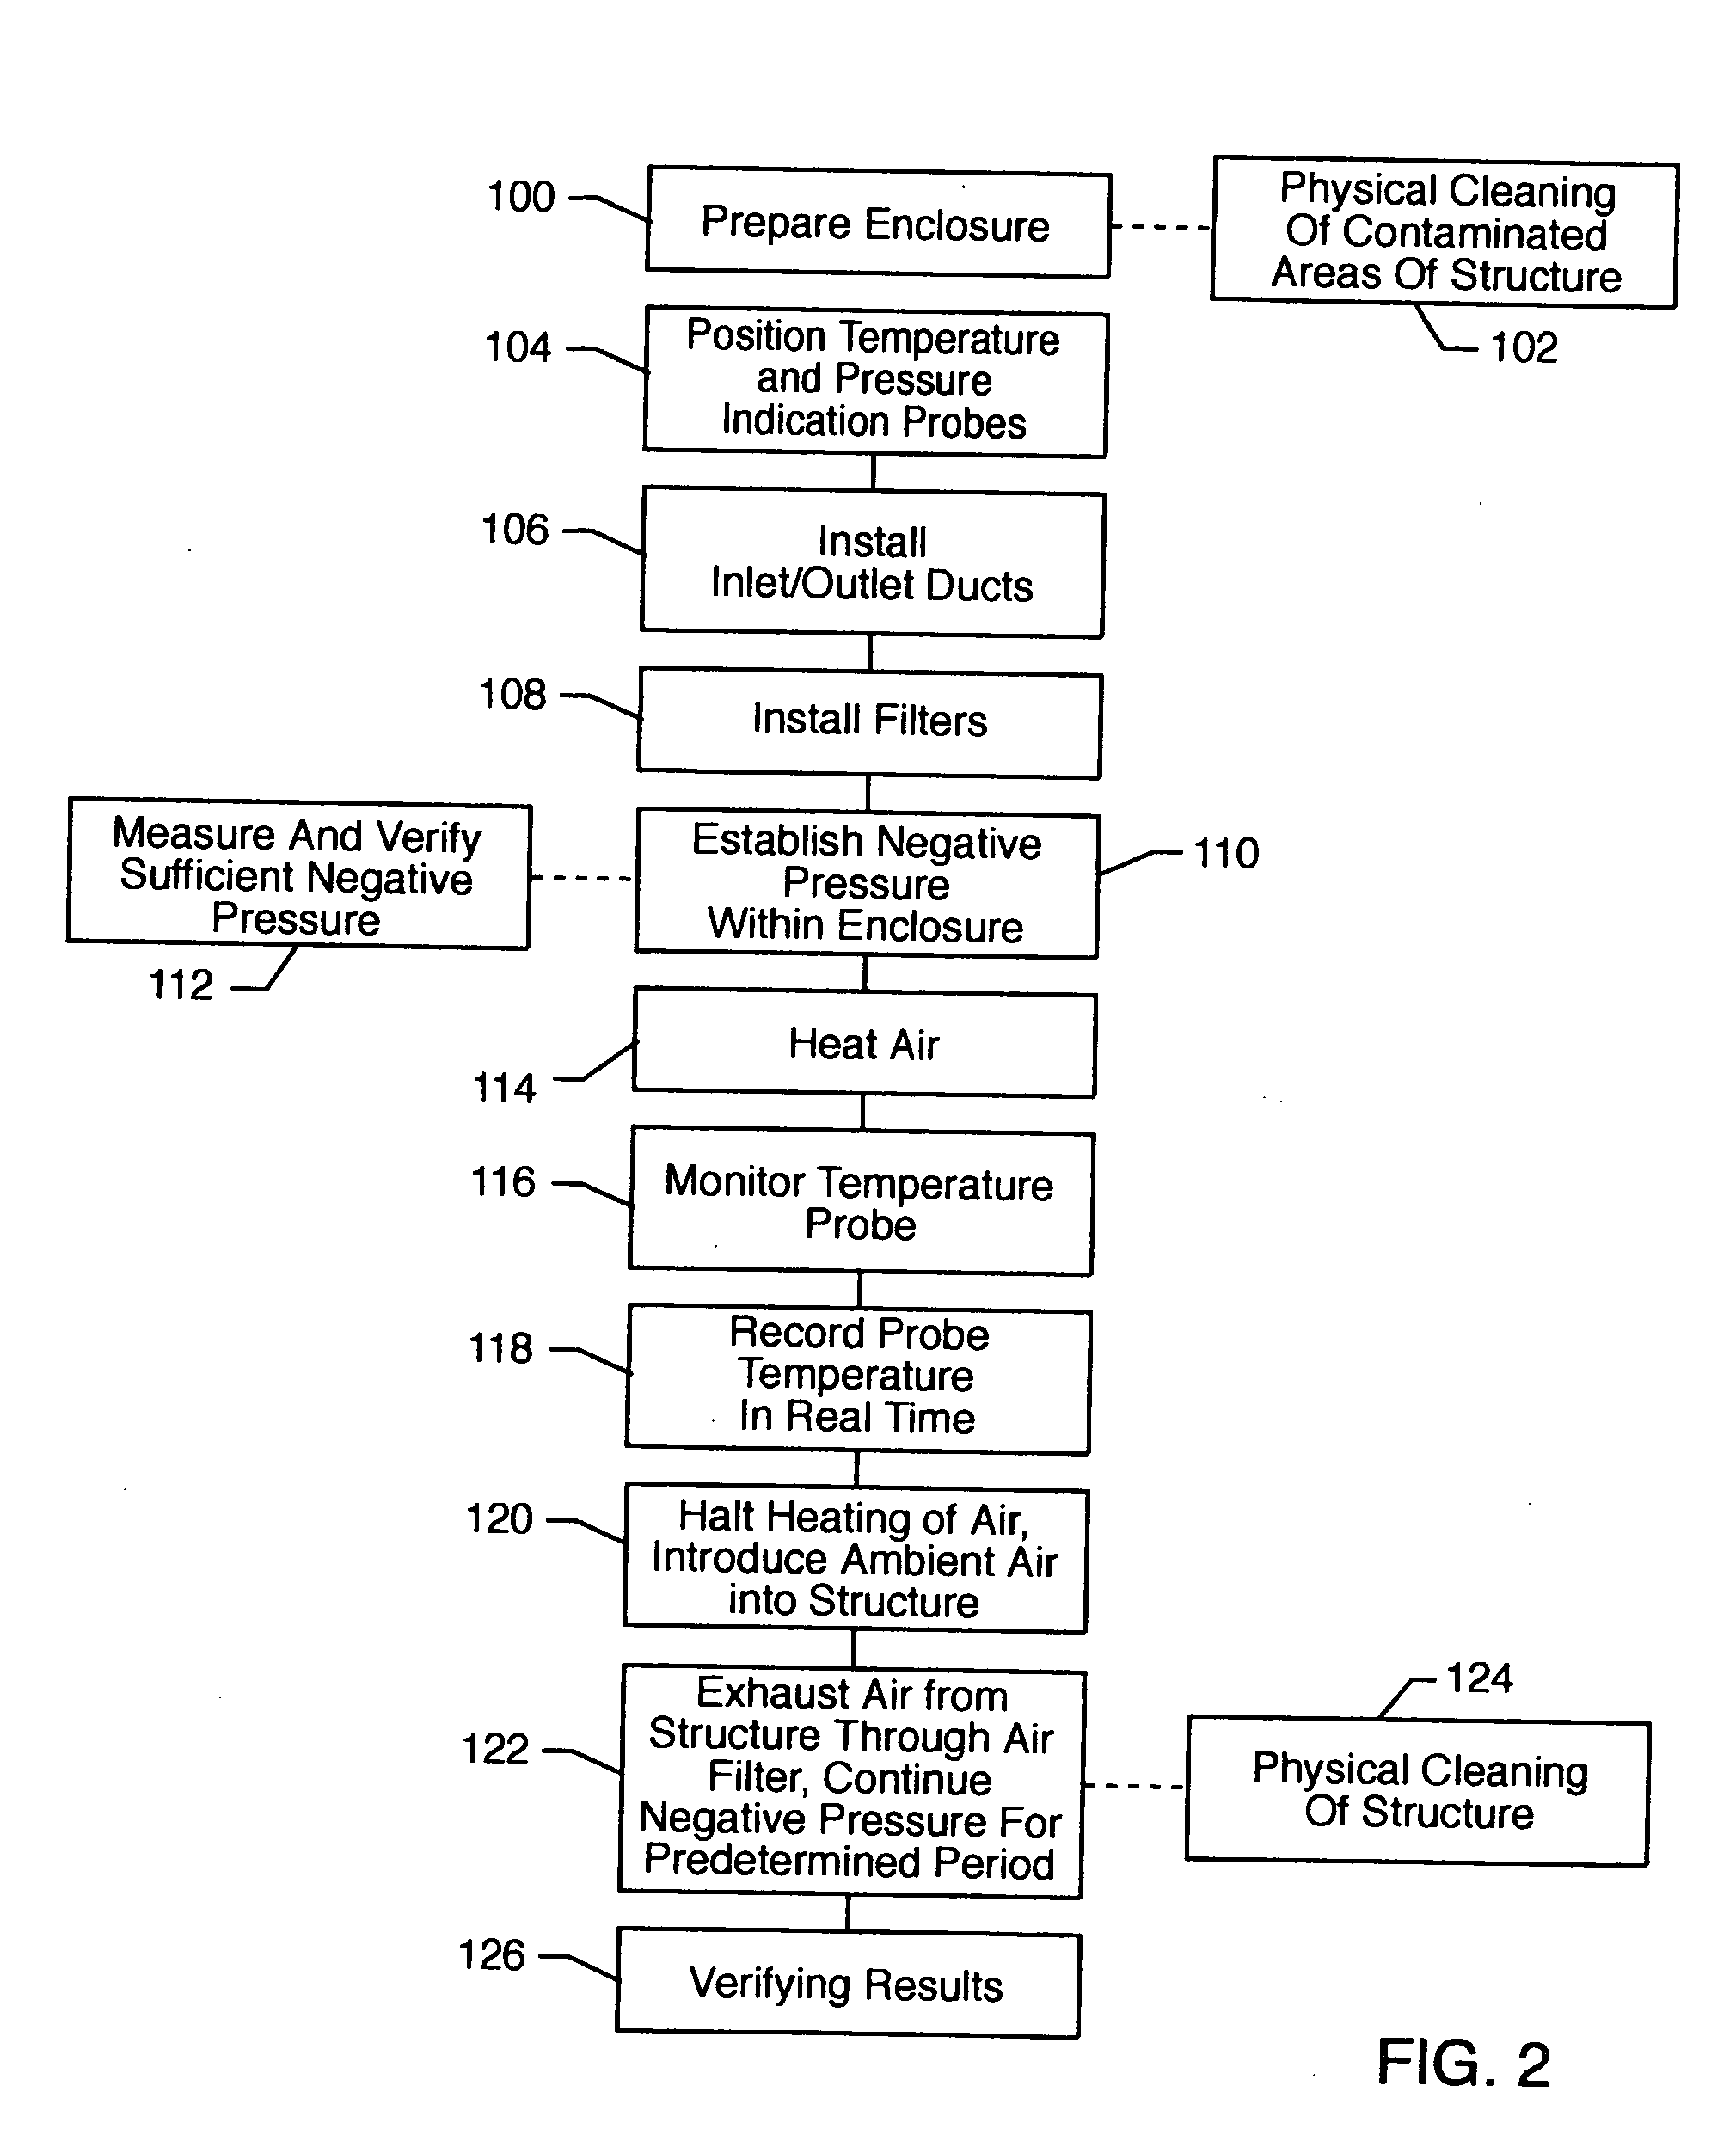 Method for removing or treating harmful biological and chemical substances within structures and enclosures